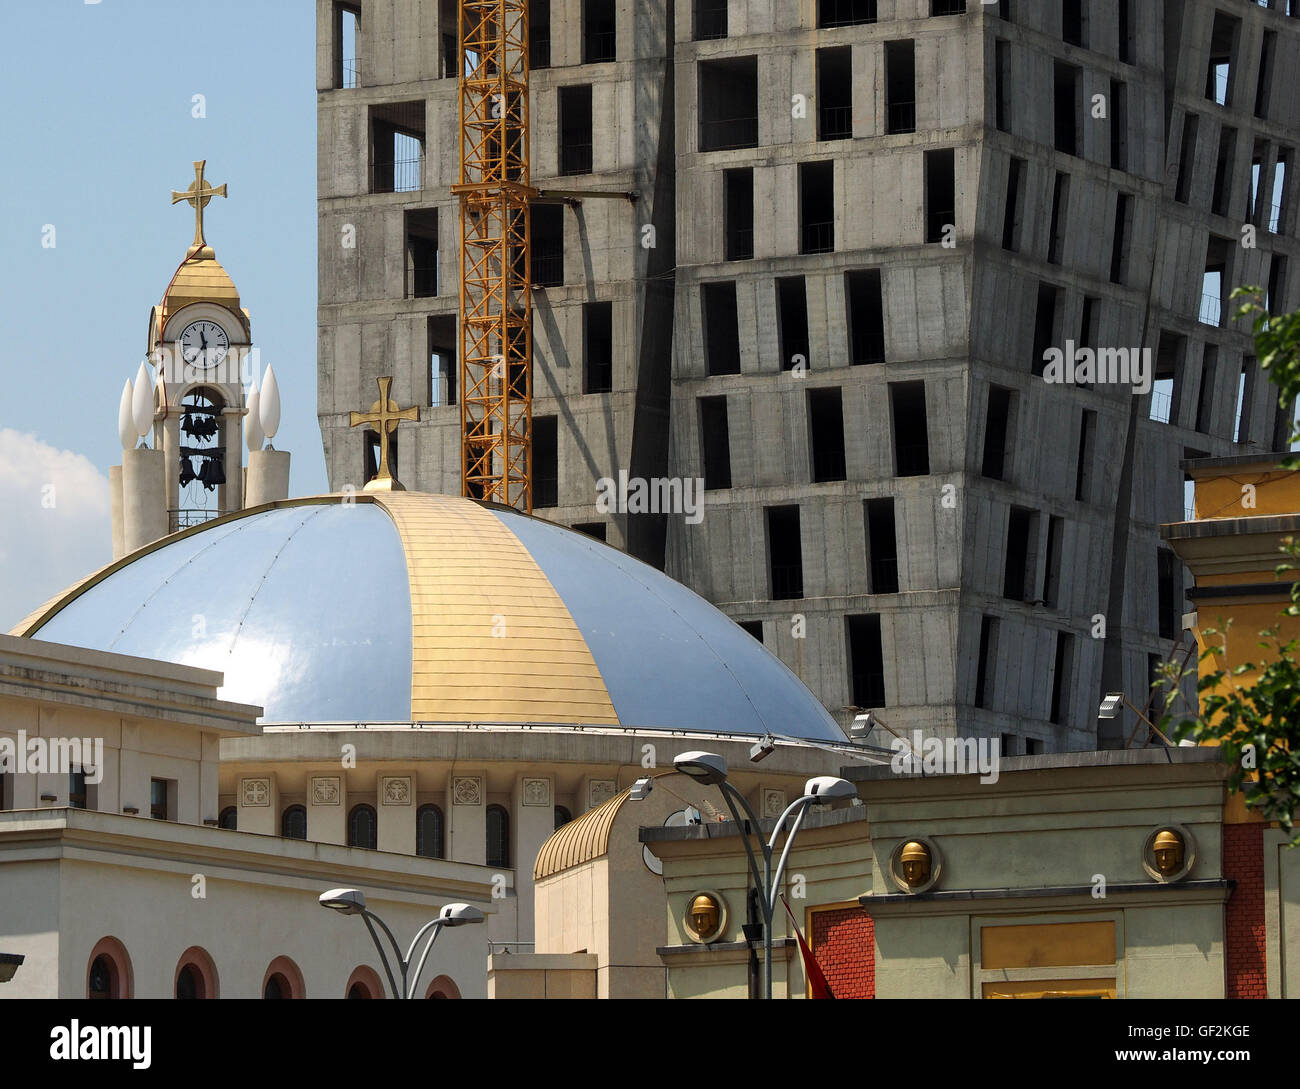 Juxtaposition of traditional domed orthodox church and base of new skyscraper building in Albanian capital Tirana in the Balkans Stock Photo